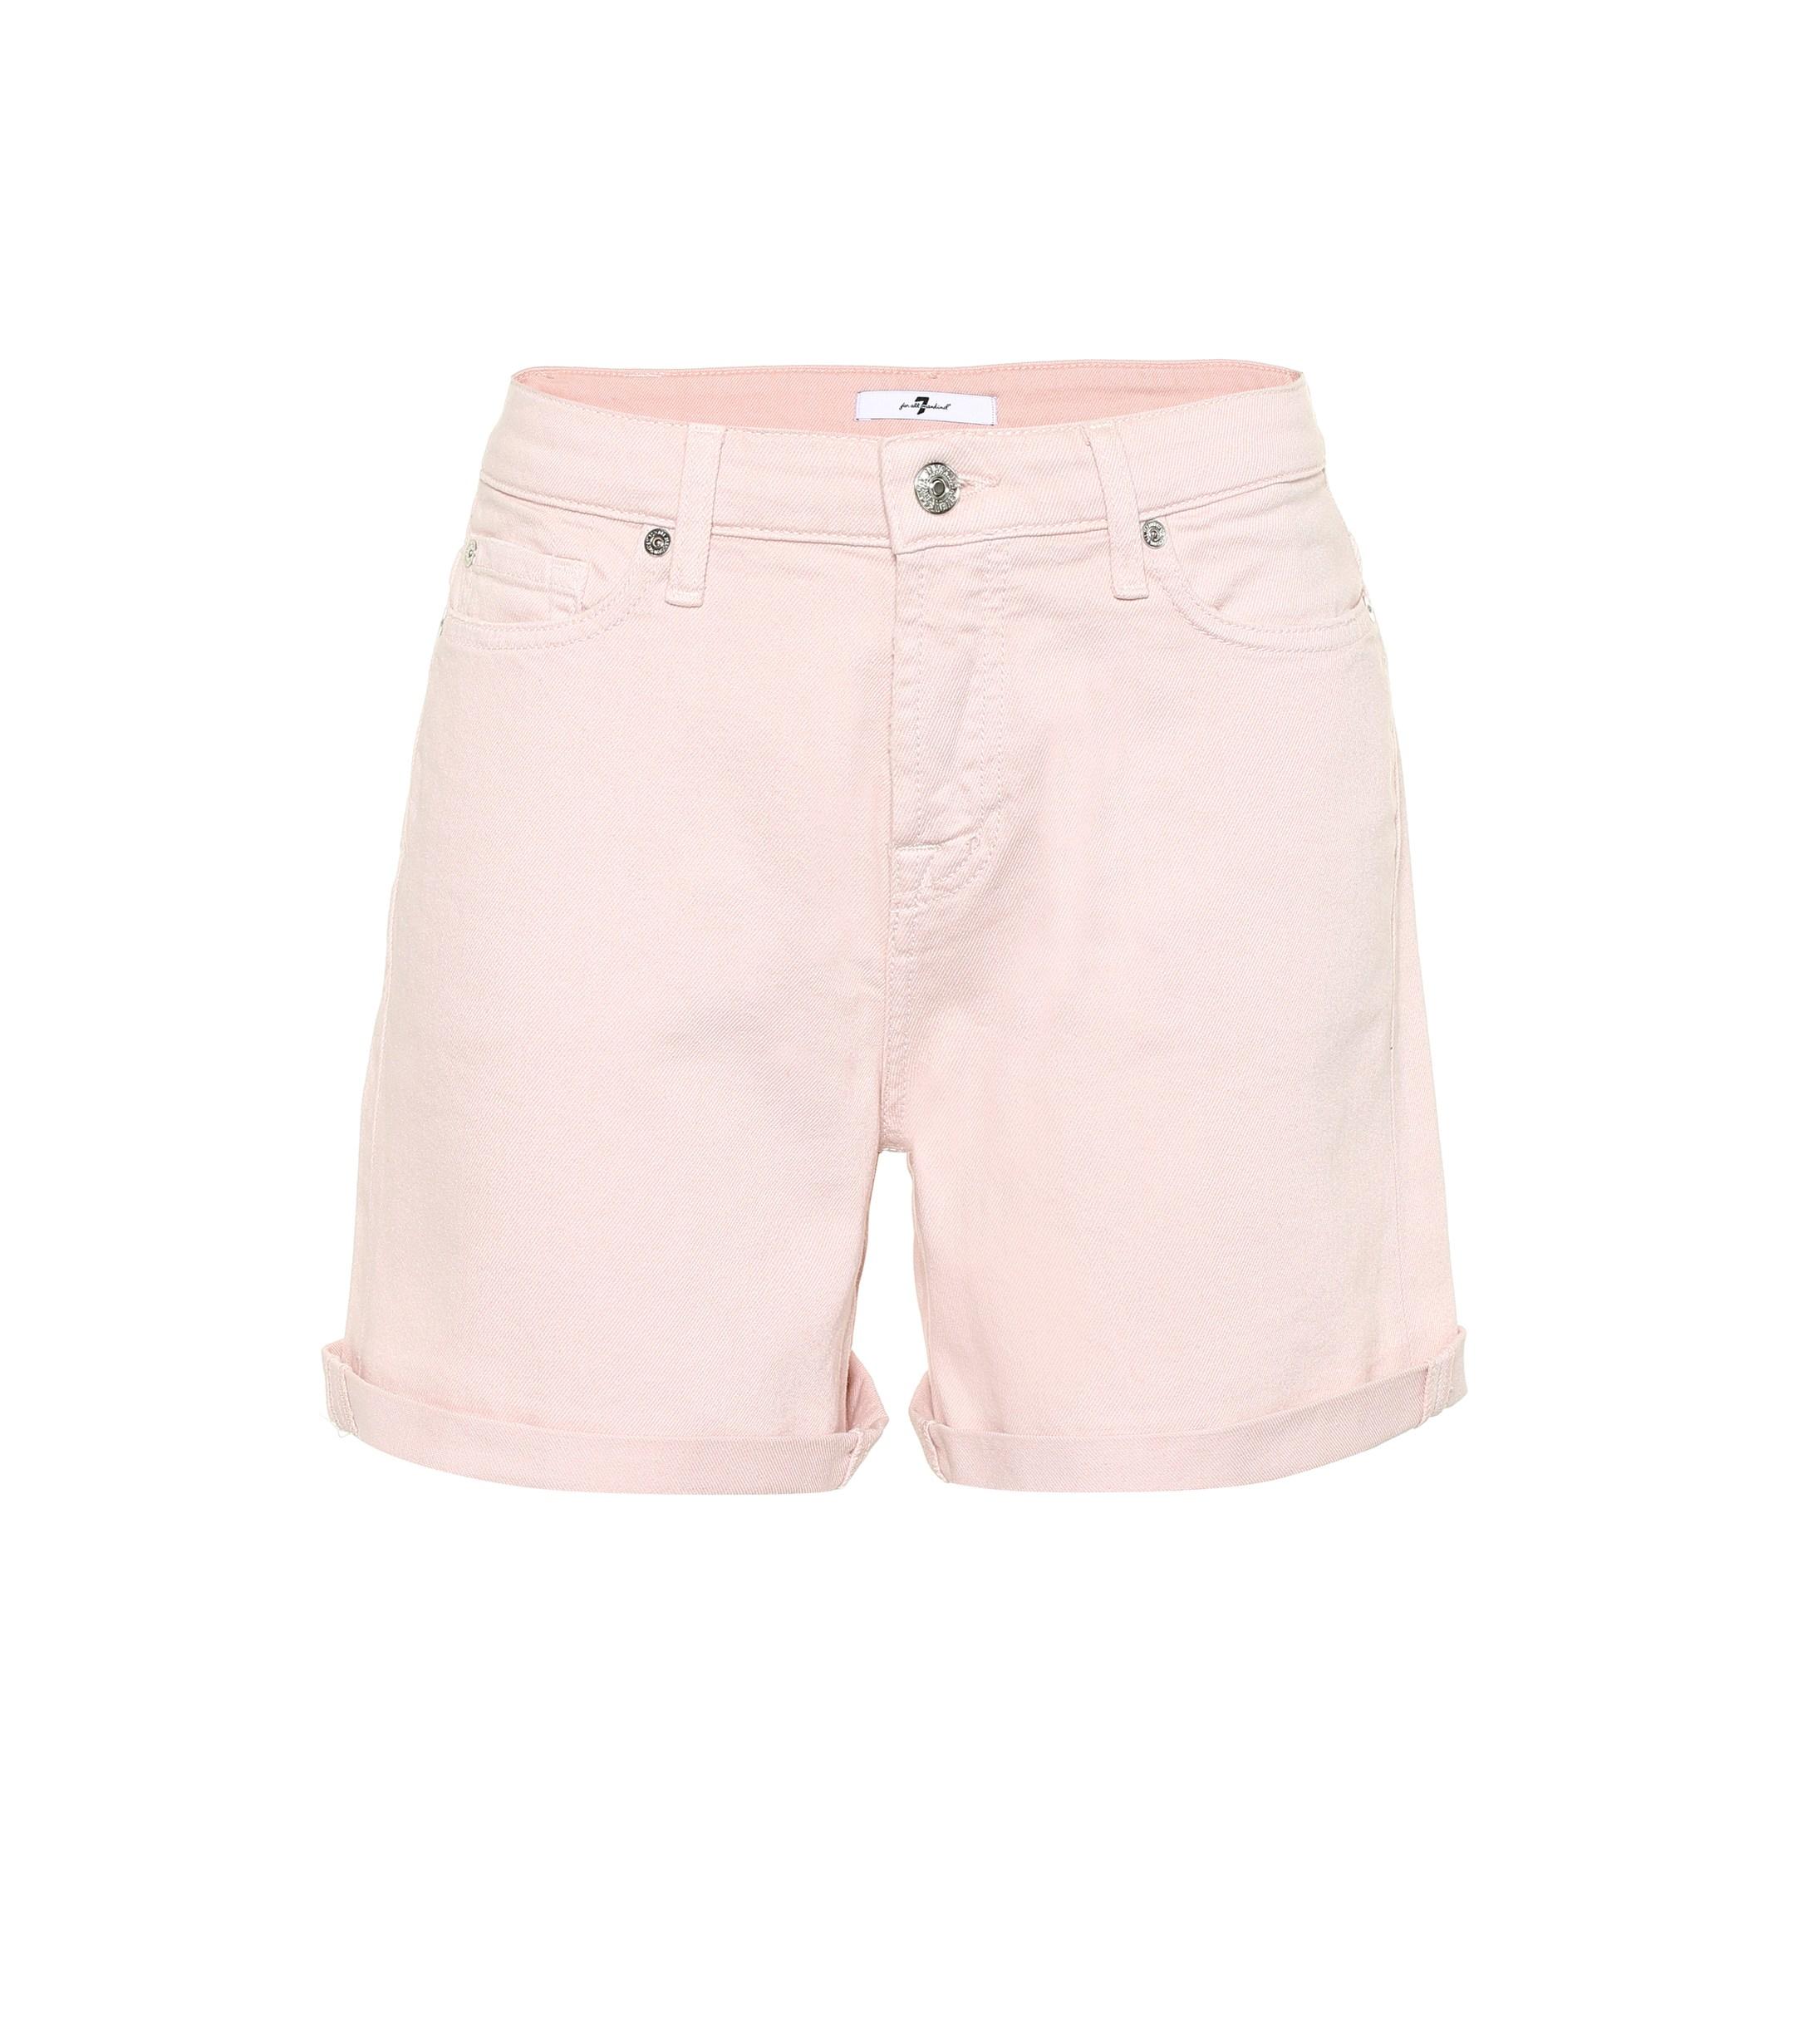 7 For All Mankind Boy Shorts High-rise Denim Shorts in Pink - Lyst